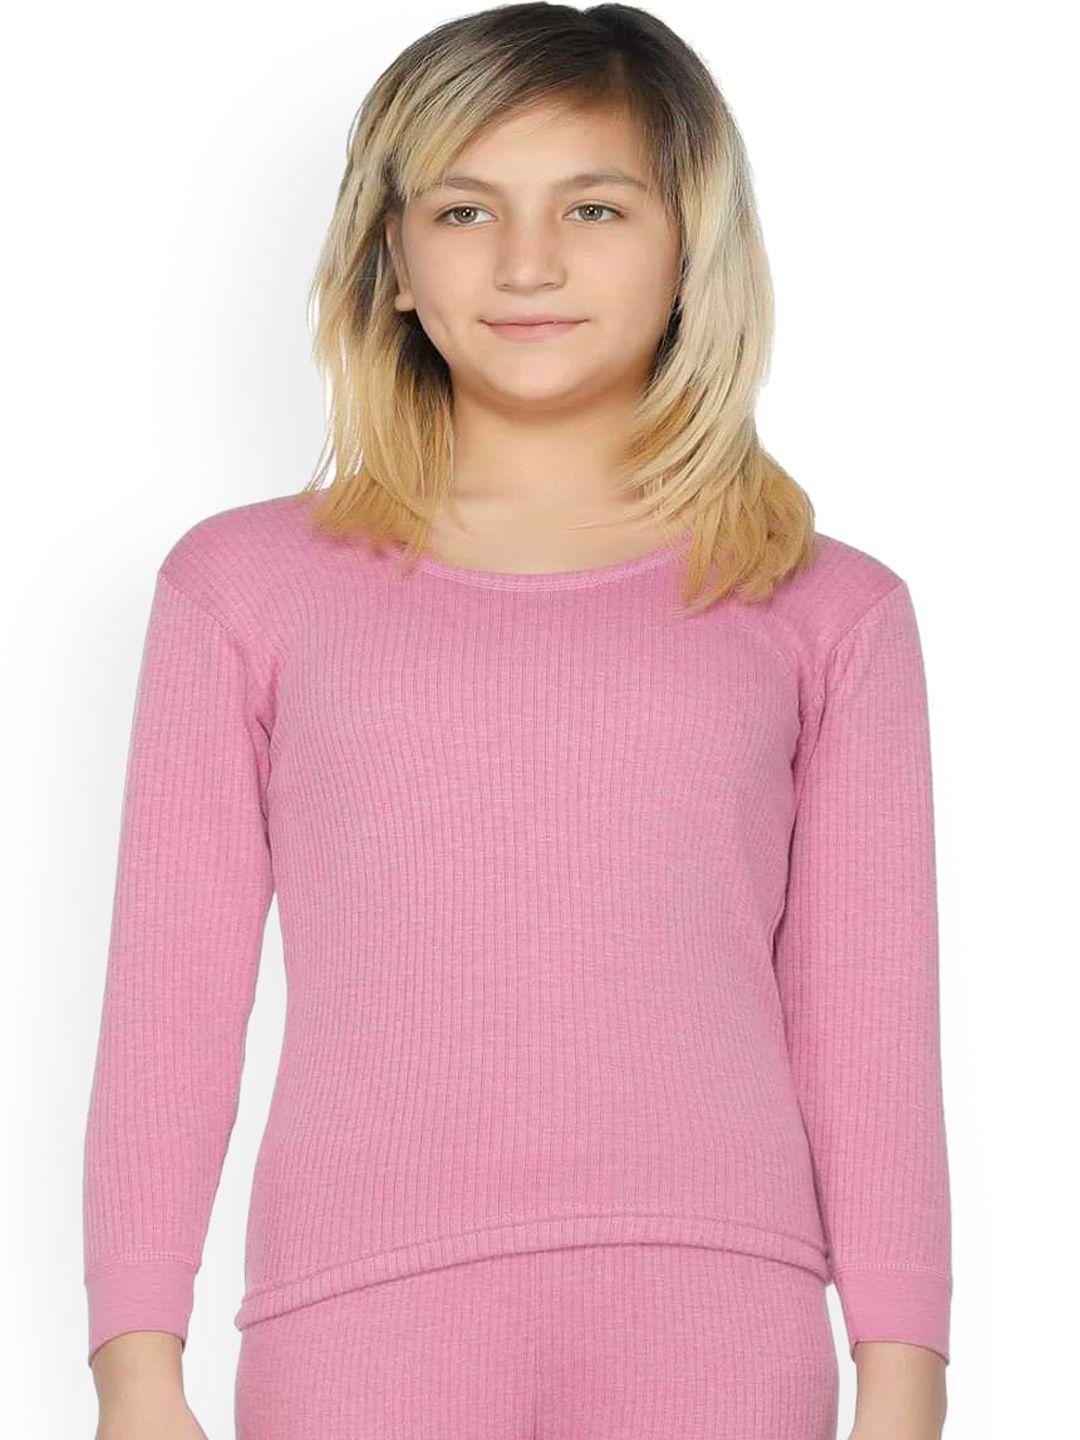 bodycare kids boys fuchsia pink solid cotton thermal tops